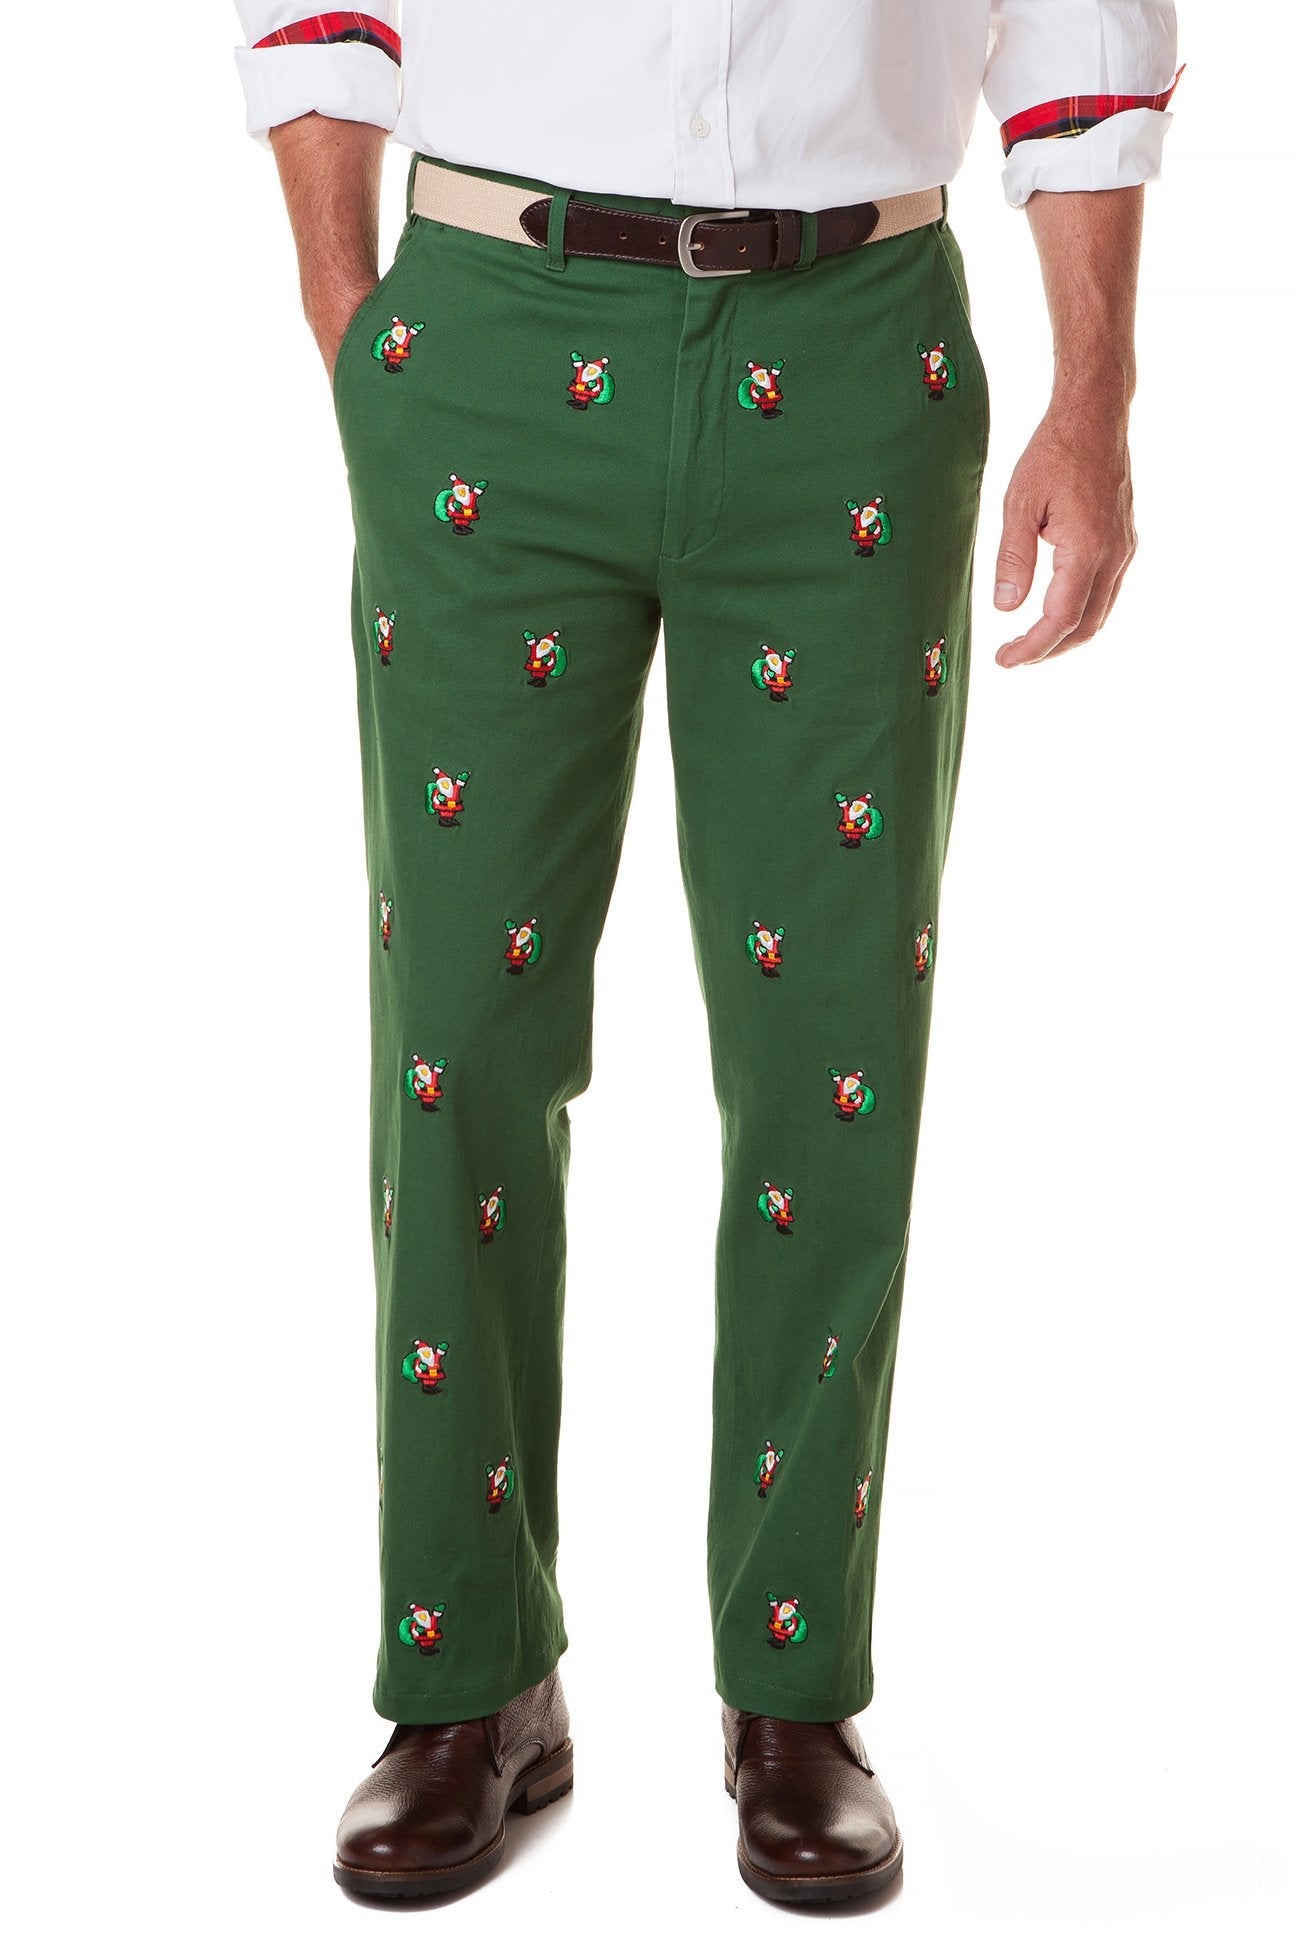 Harbor Pant Stretch Twill Hunter with Santa - MENS EMBROIDERED PANTS - Castaway Nantucket Island